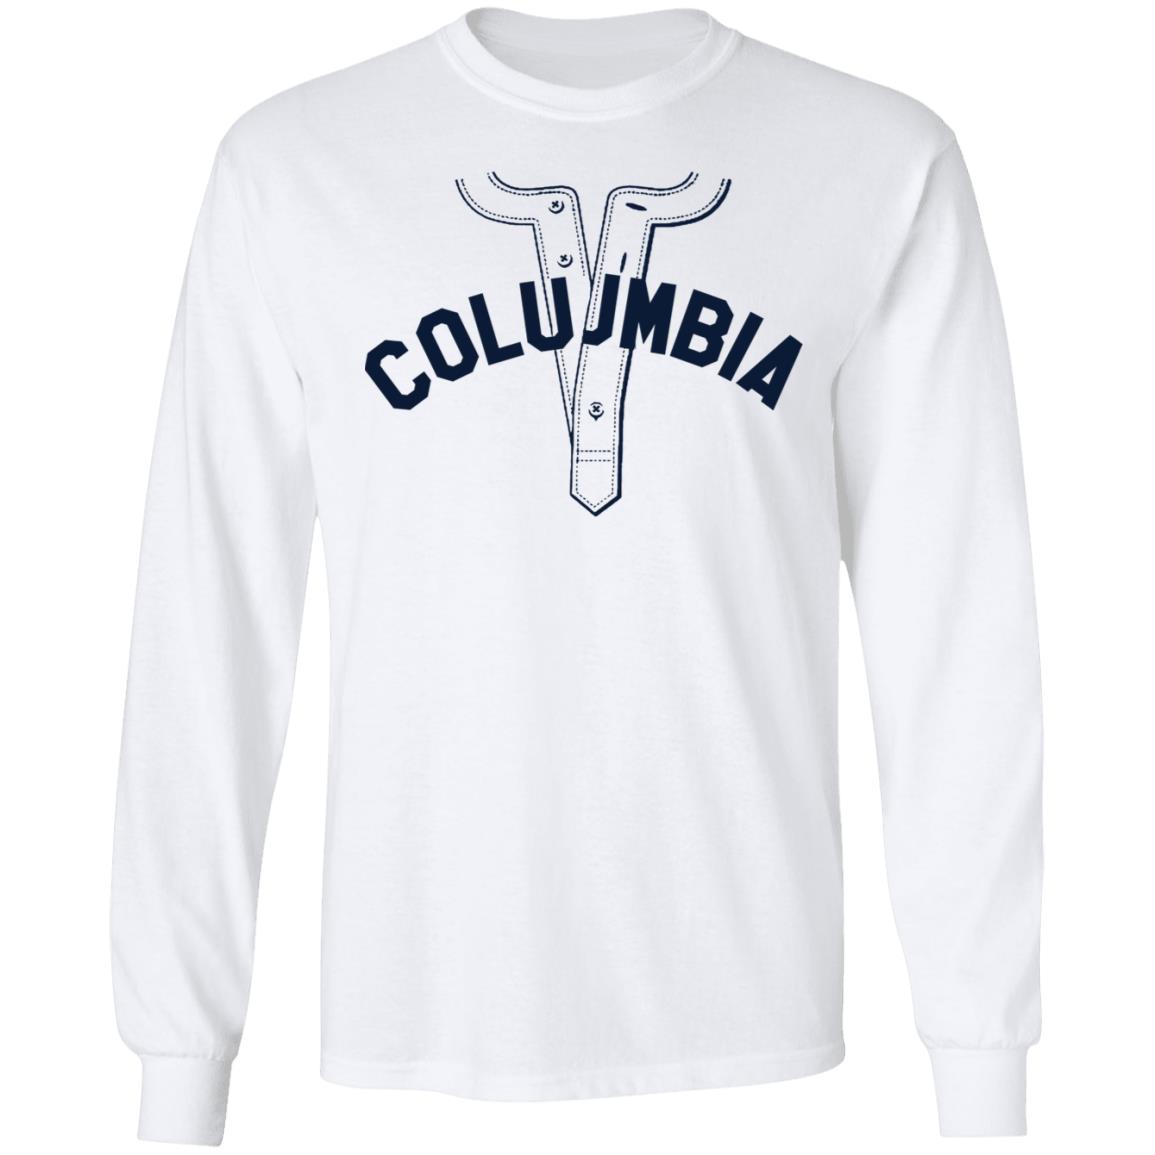 Columbia University Athletics - Today we join the MLB in celebrating the first  Lou Gehrig Day, raising awareness #4ALS. We'll be selling replica t-shirt  jerseys inspired by the Columbia Baseball alum to